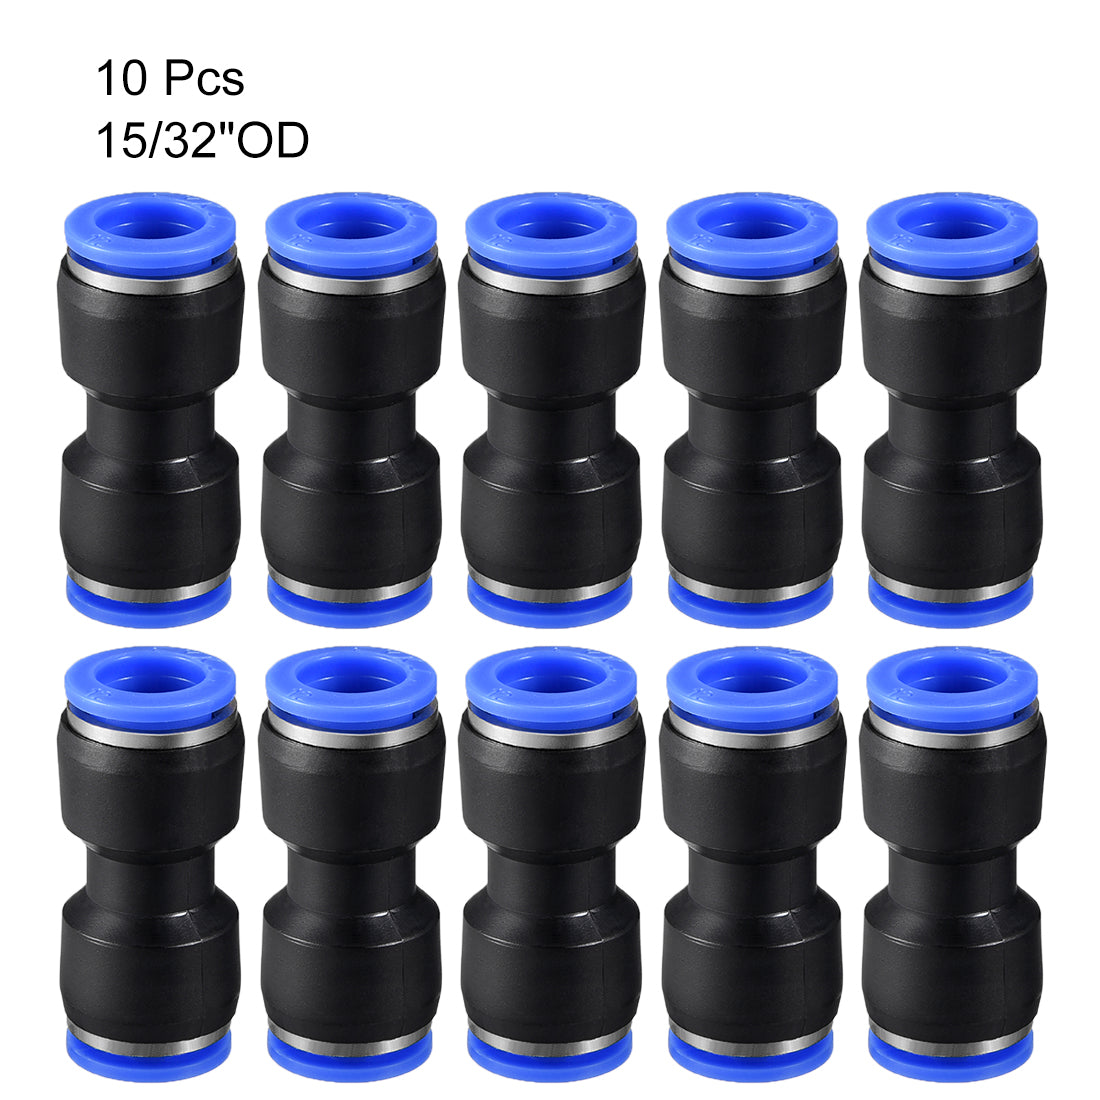 uxcell Uxcell Push to Connect Fittings Tube Connect  12mm or 15/32" Straight OD Push Fit Fittings Tube Fittings Push Lock Blue 10pcs